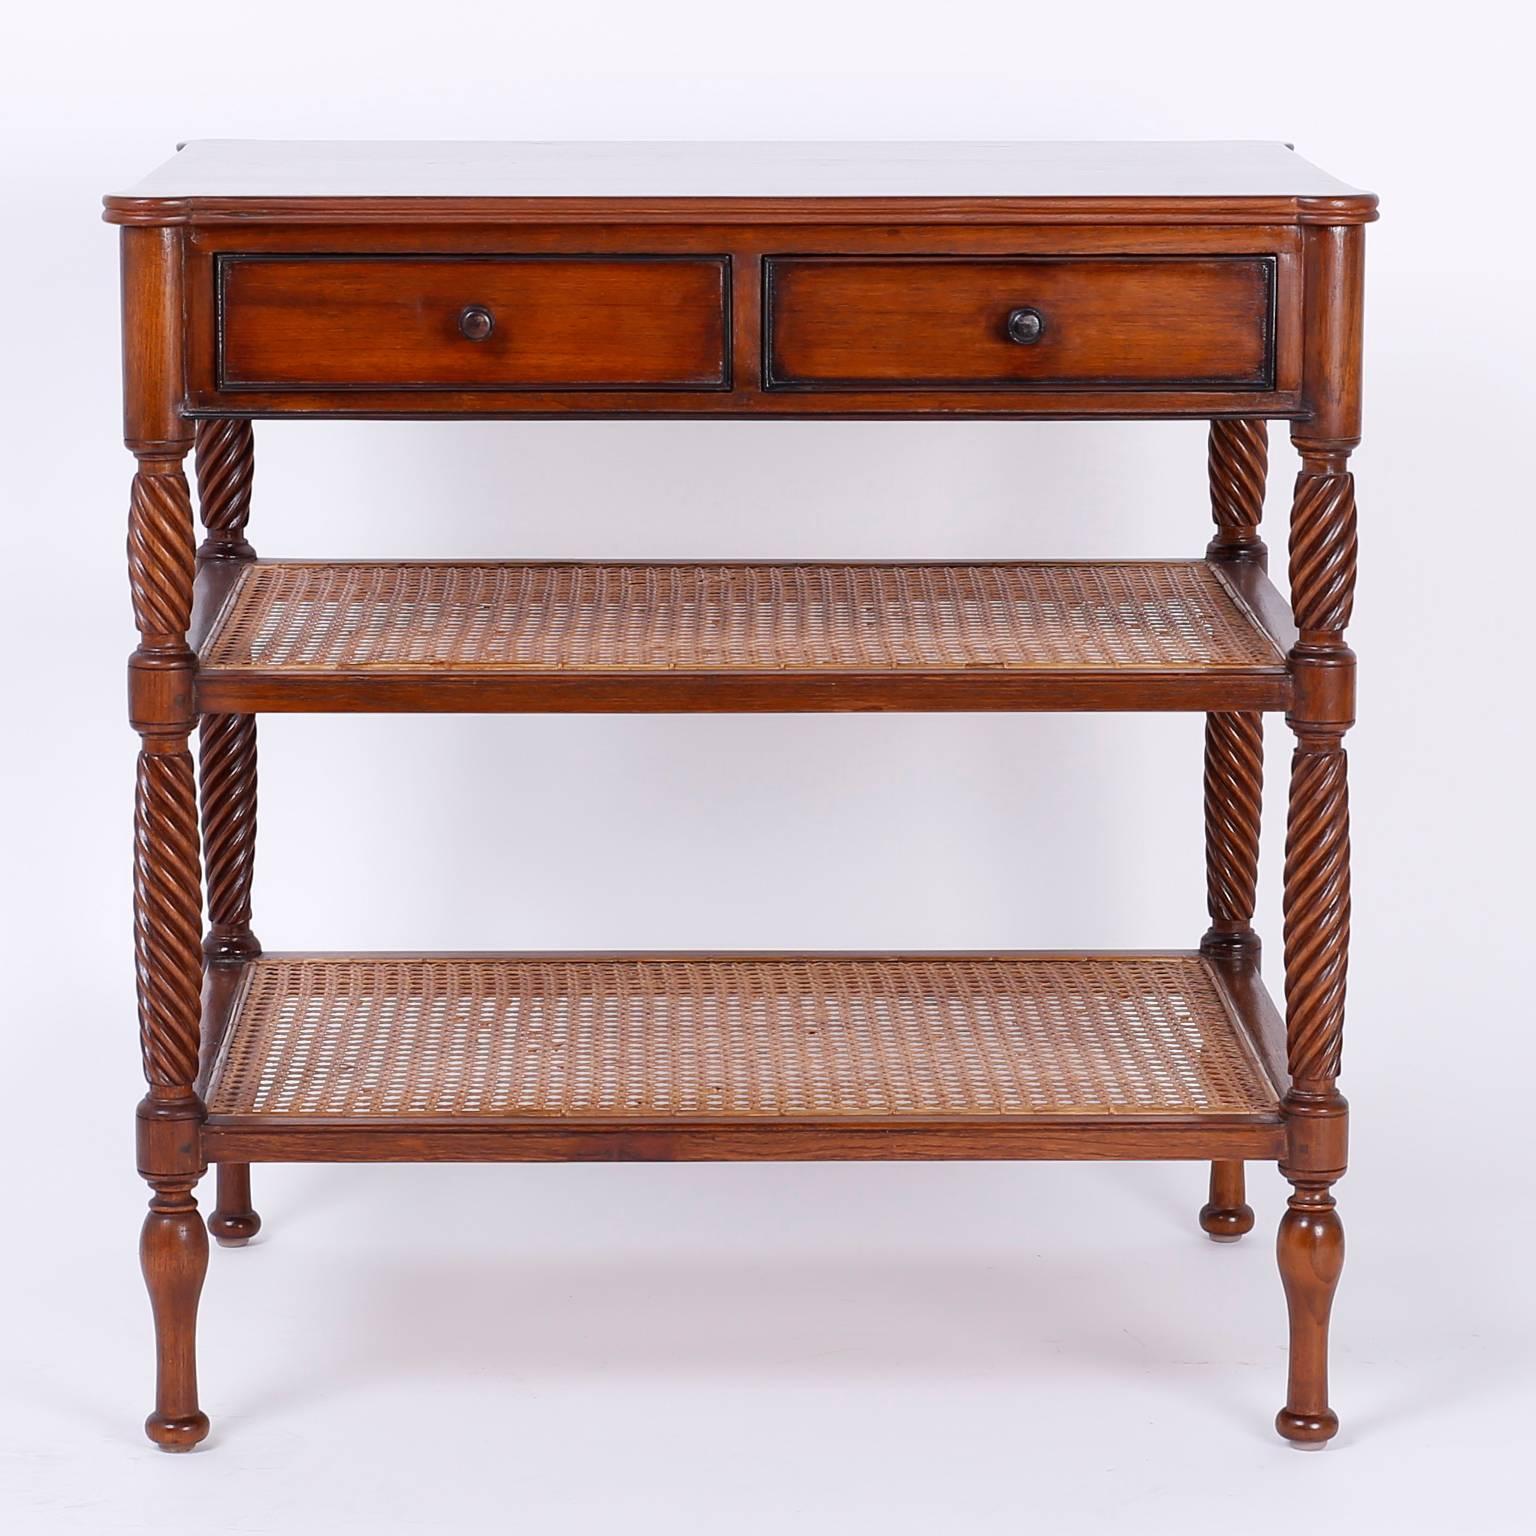 Handsome, vintage mahogany side table or console with a West Indian vibe. Featuring a two drawer case above two caned shelves with elegant turned and carved supports that give this piece authentic, tropical, British Colonial appeal.